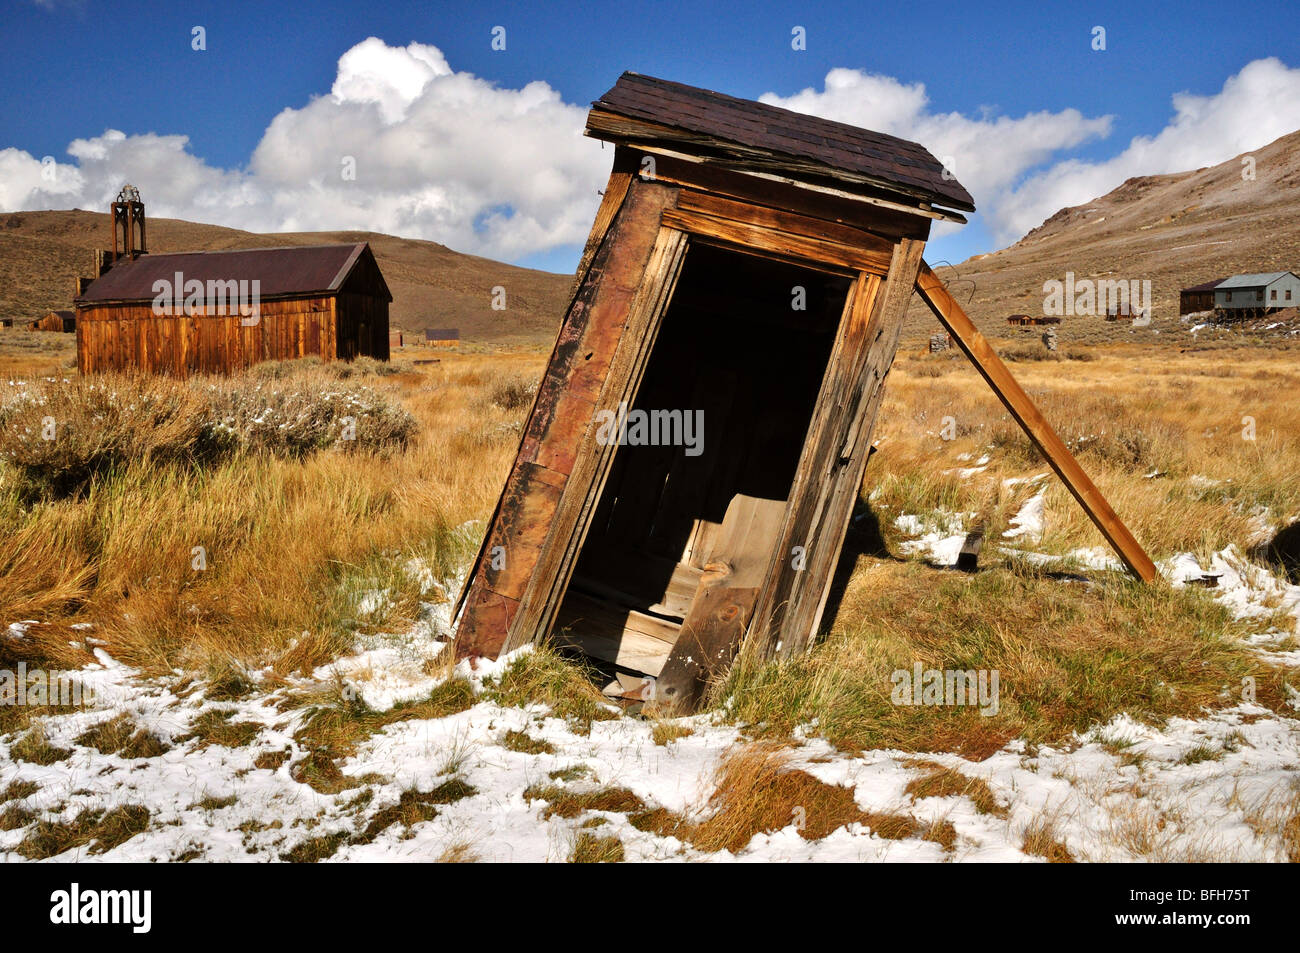 Leaning outhouse, Bodie, California Stock Photo